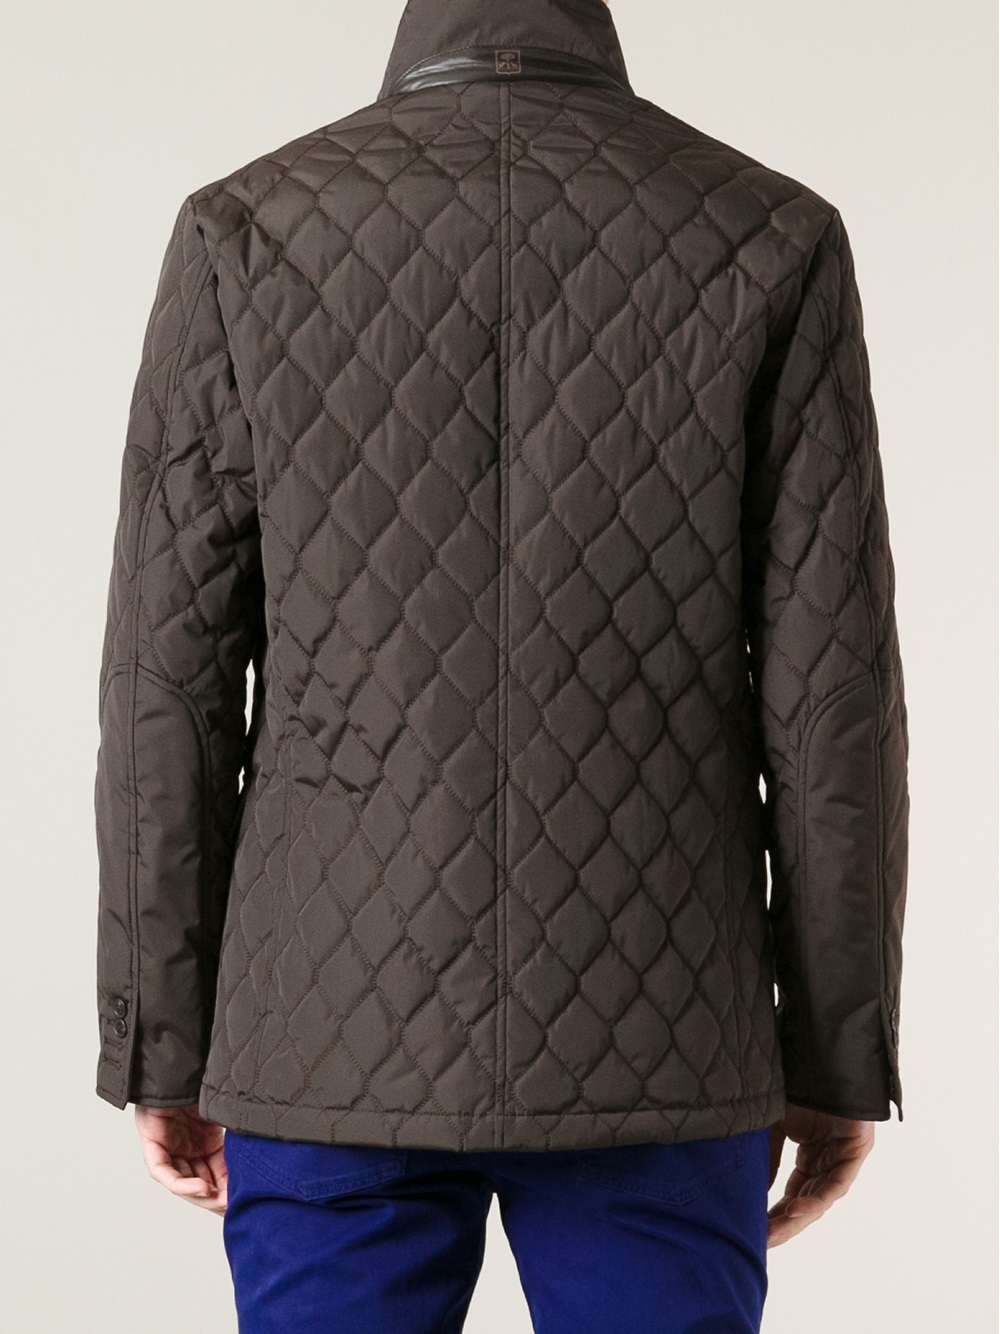 Corneliani Quilted Jacket in Brown for Men - Lyst